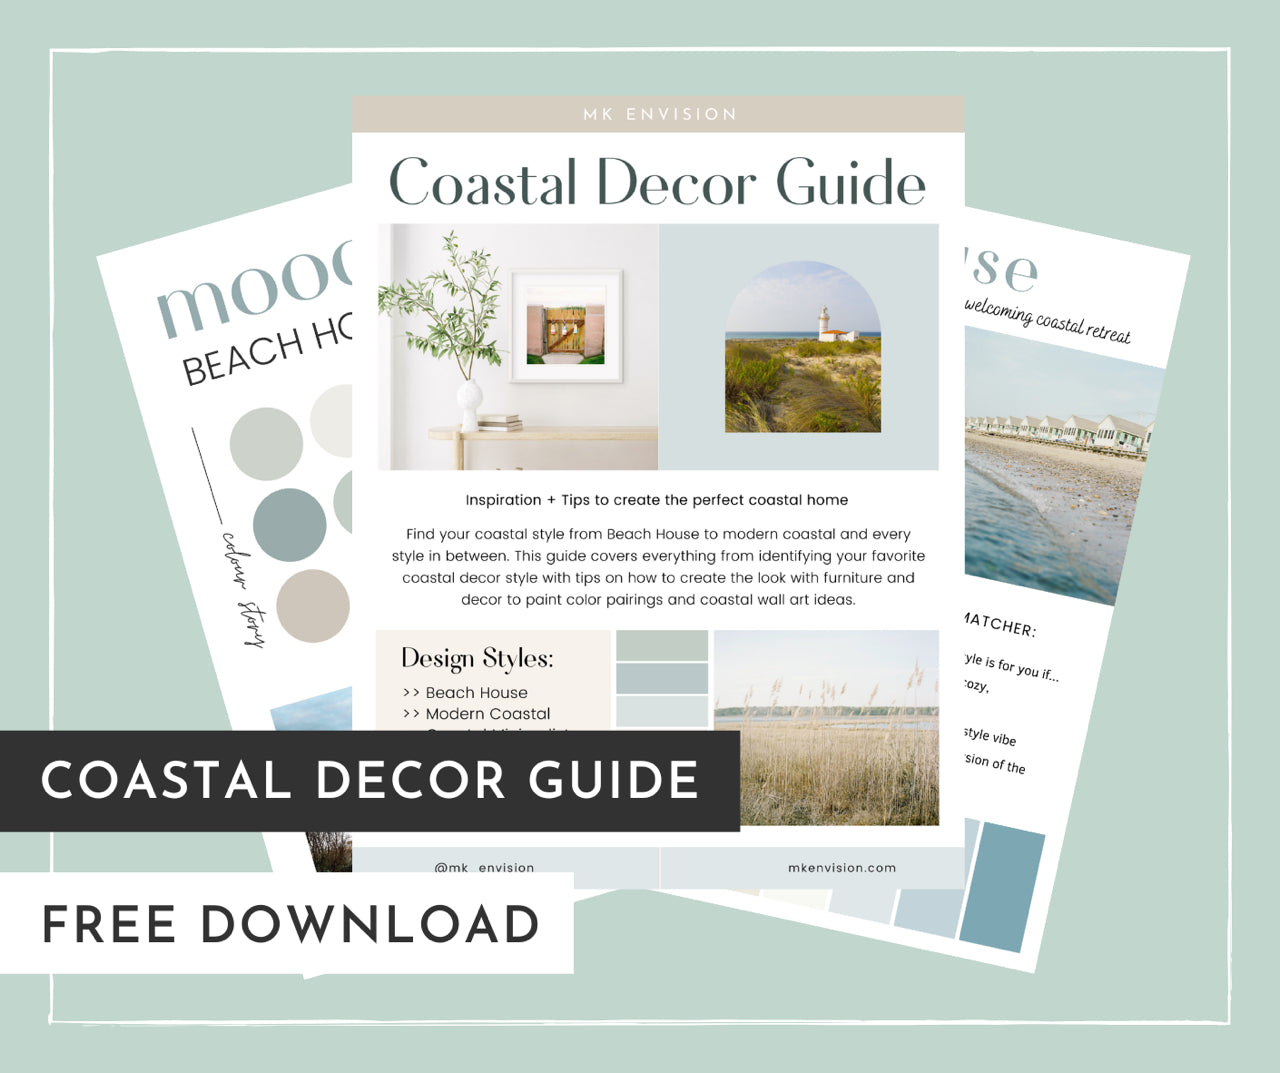 Looking for More Coastal Inspo?